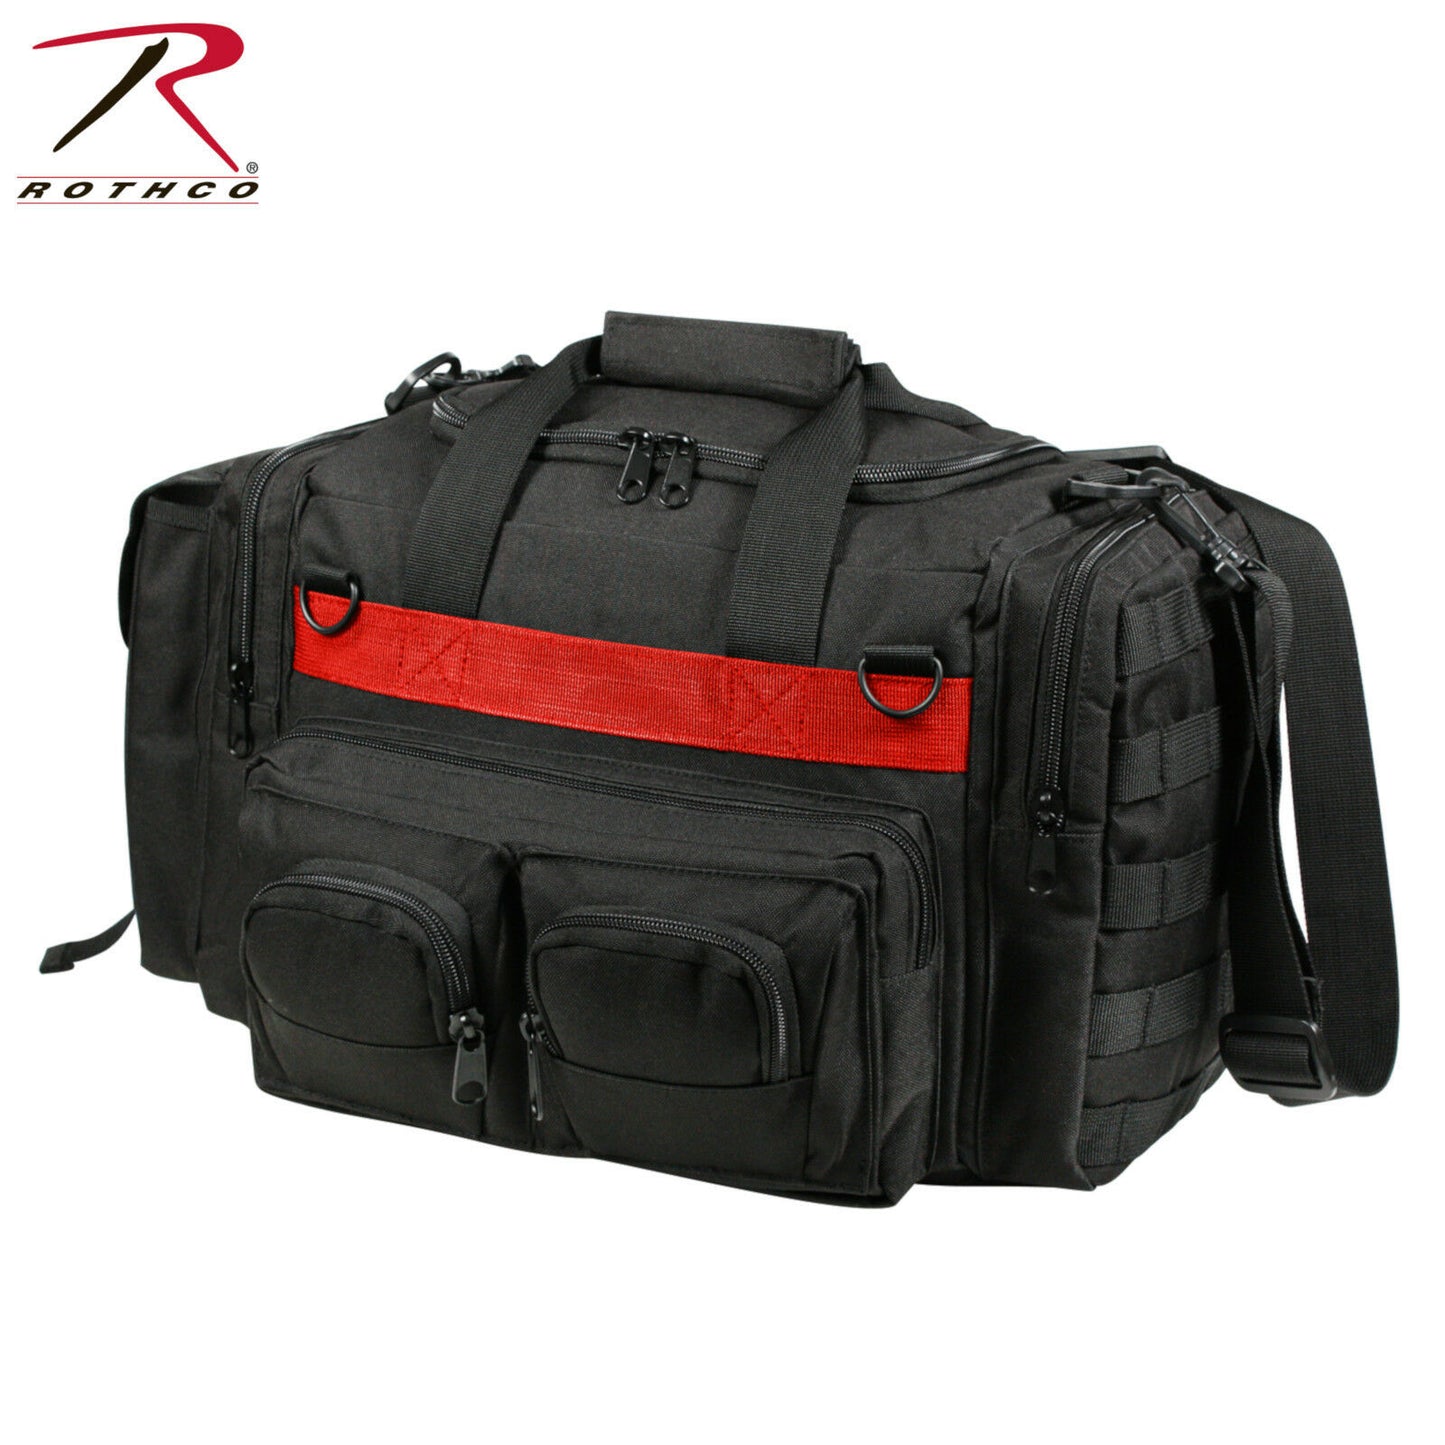 Rothco Thin Red Line Concealed Carry Bag - TRL Fire Department CCW Gear Duty Bag